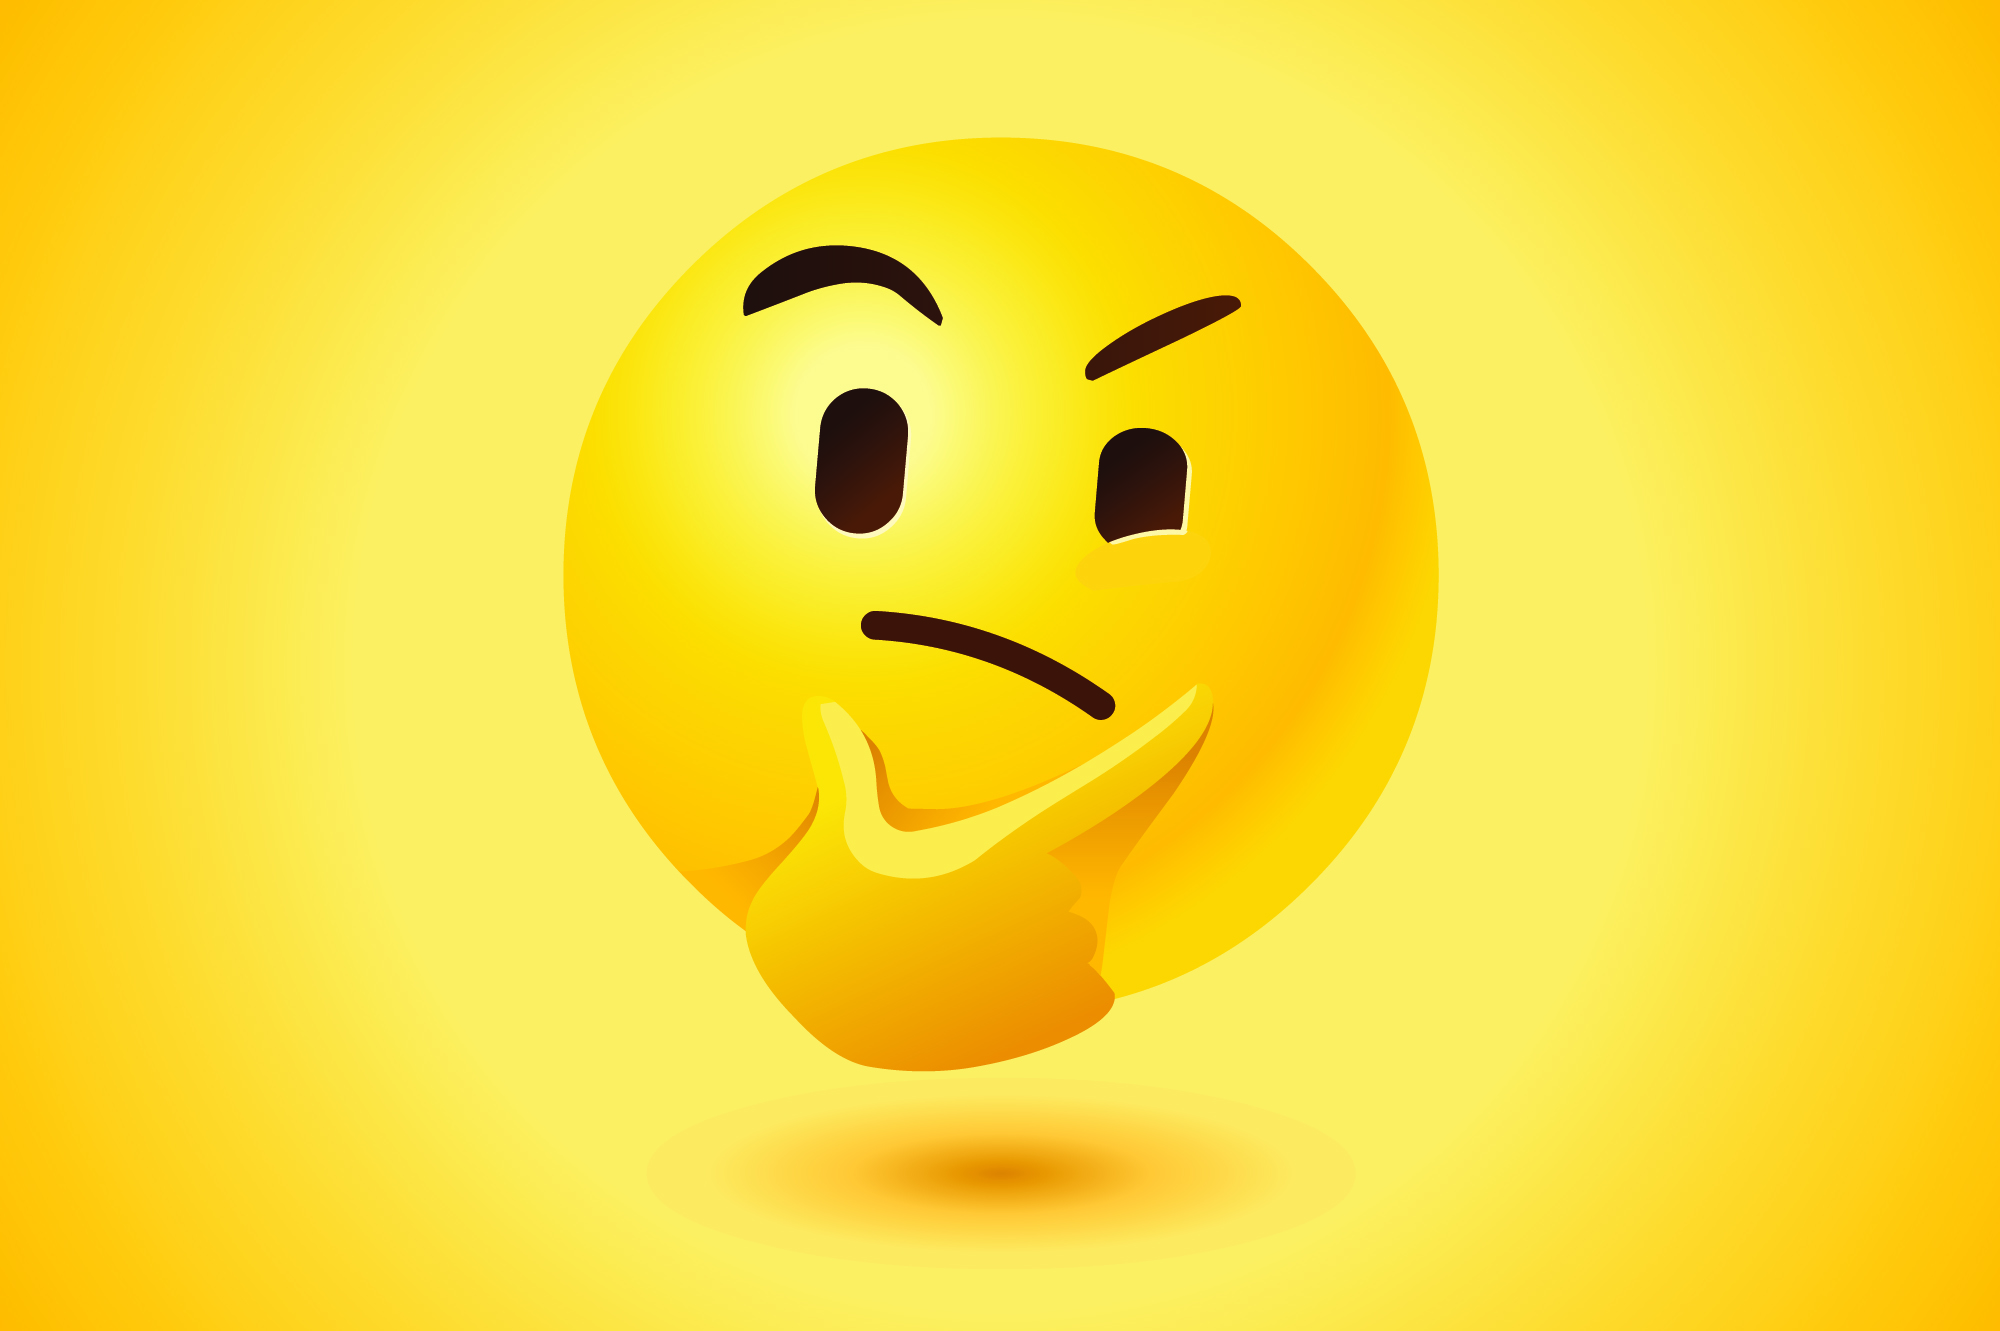 Yellow thinking face vector icon